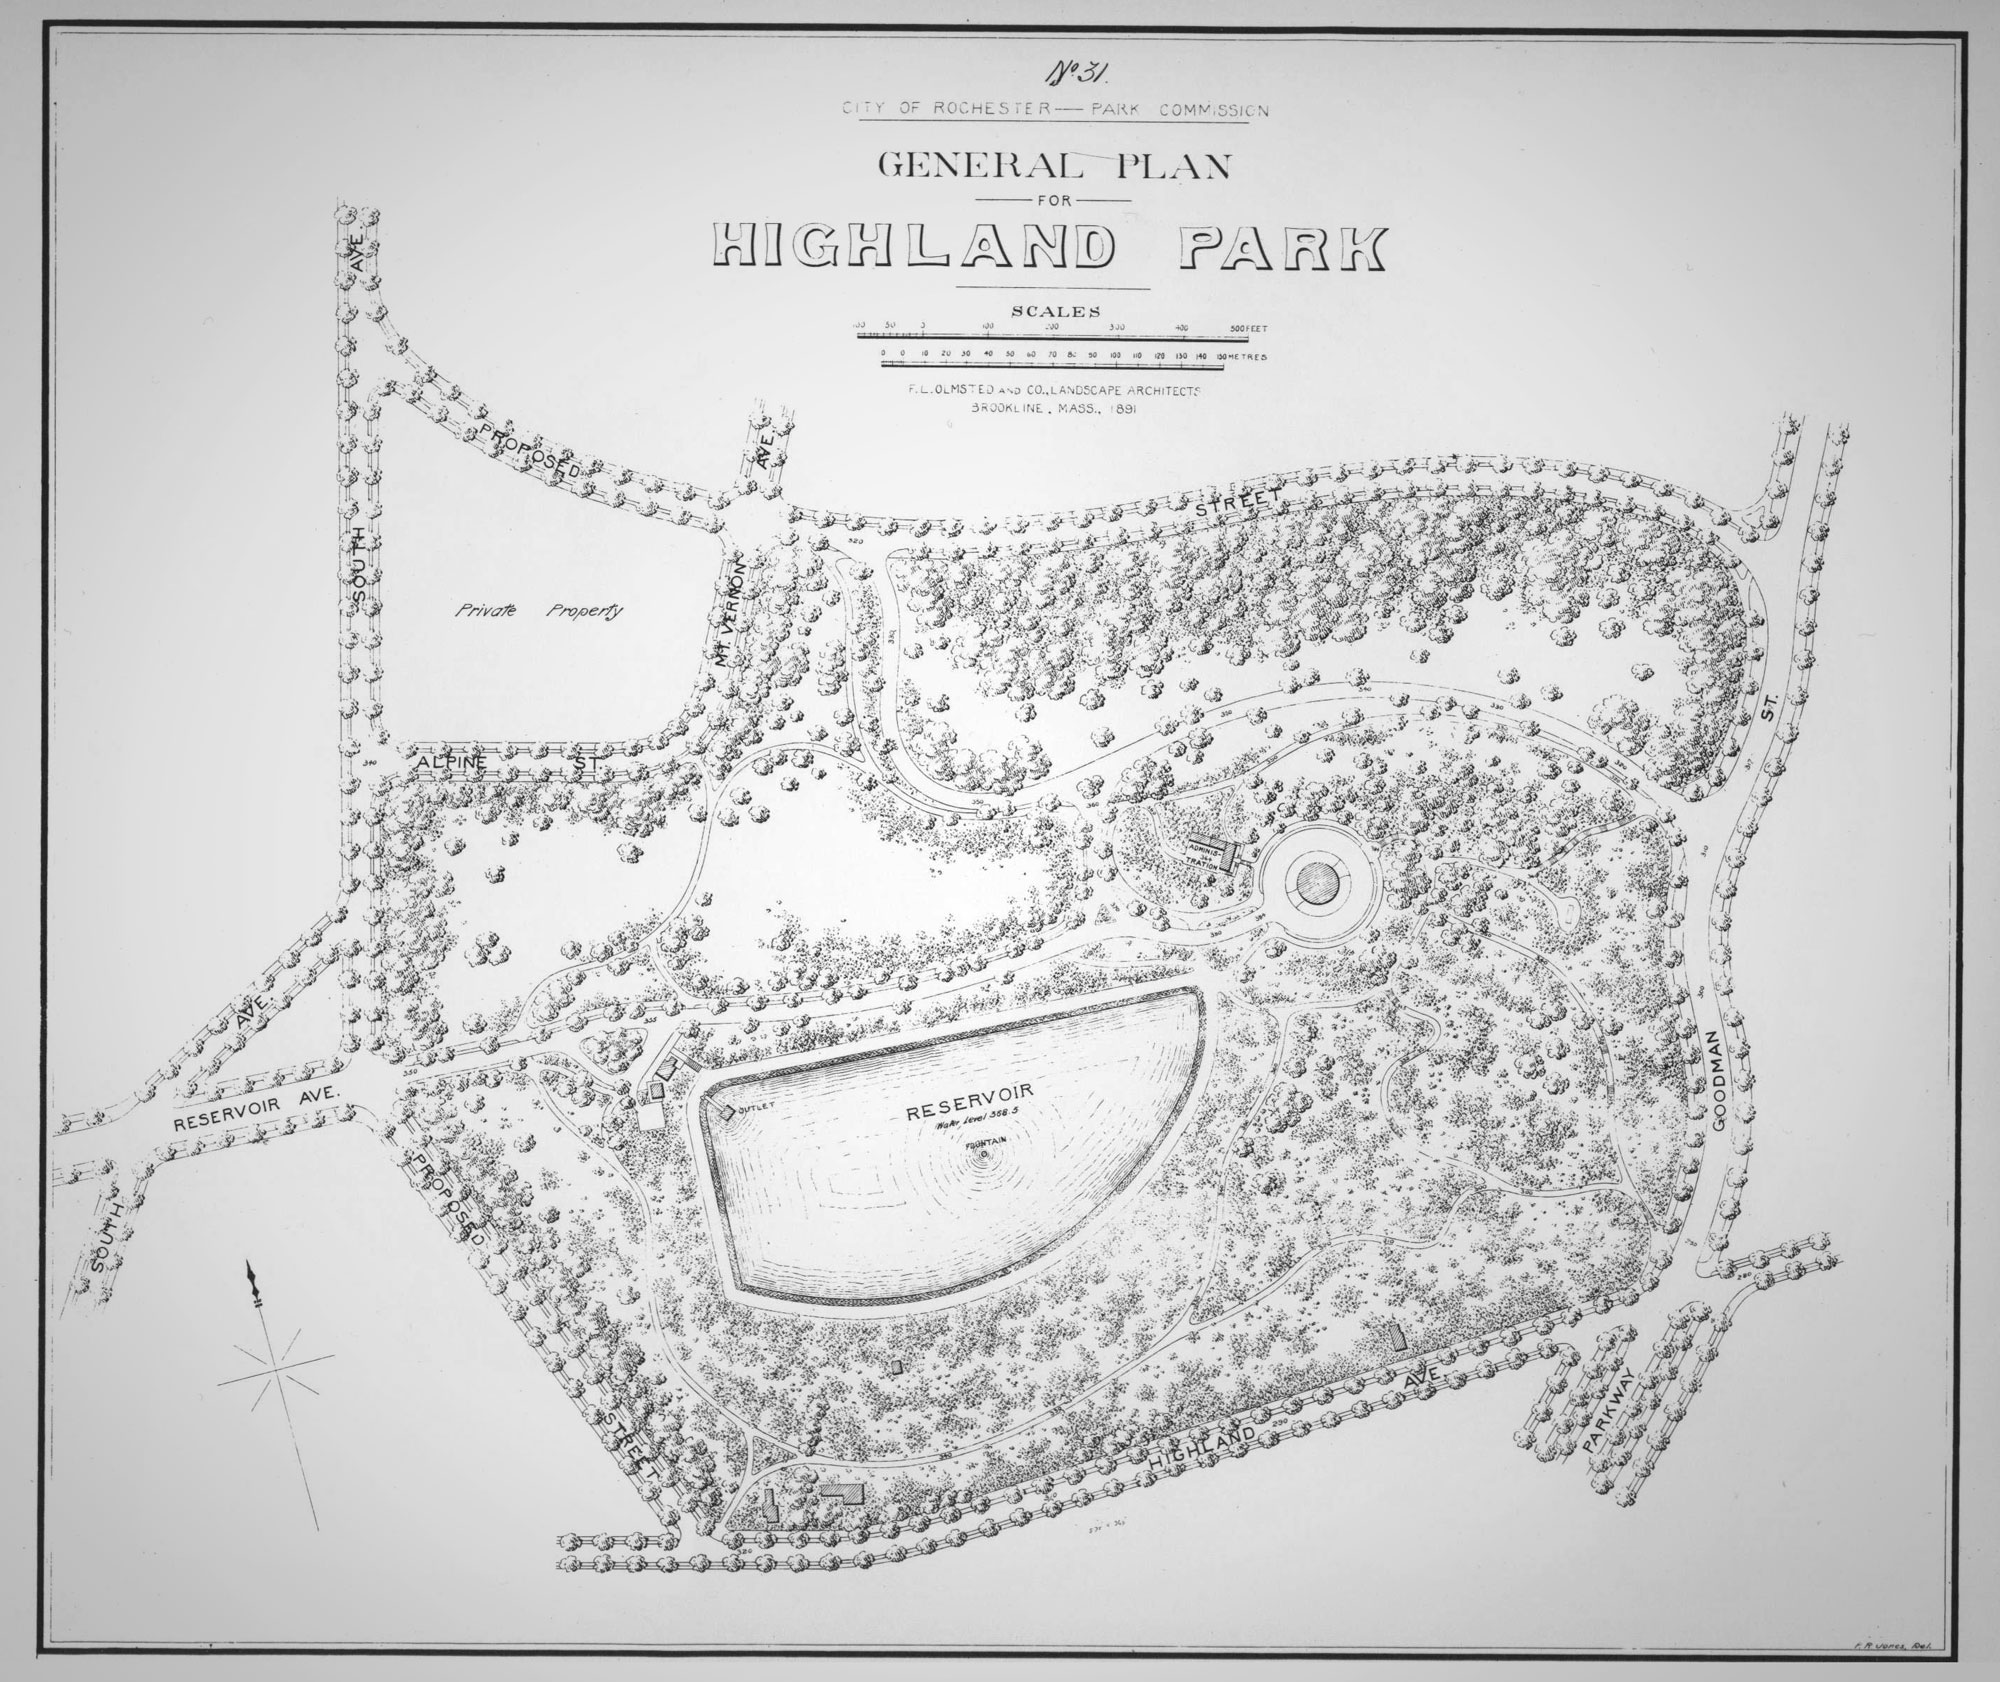 Original plan drawing of Highland Park by Frederick Law Olmsted & Co.